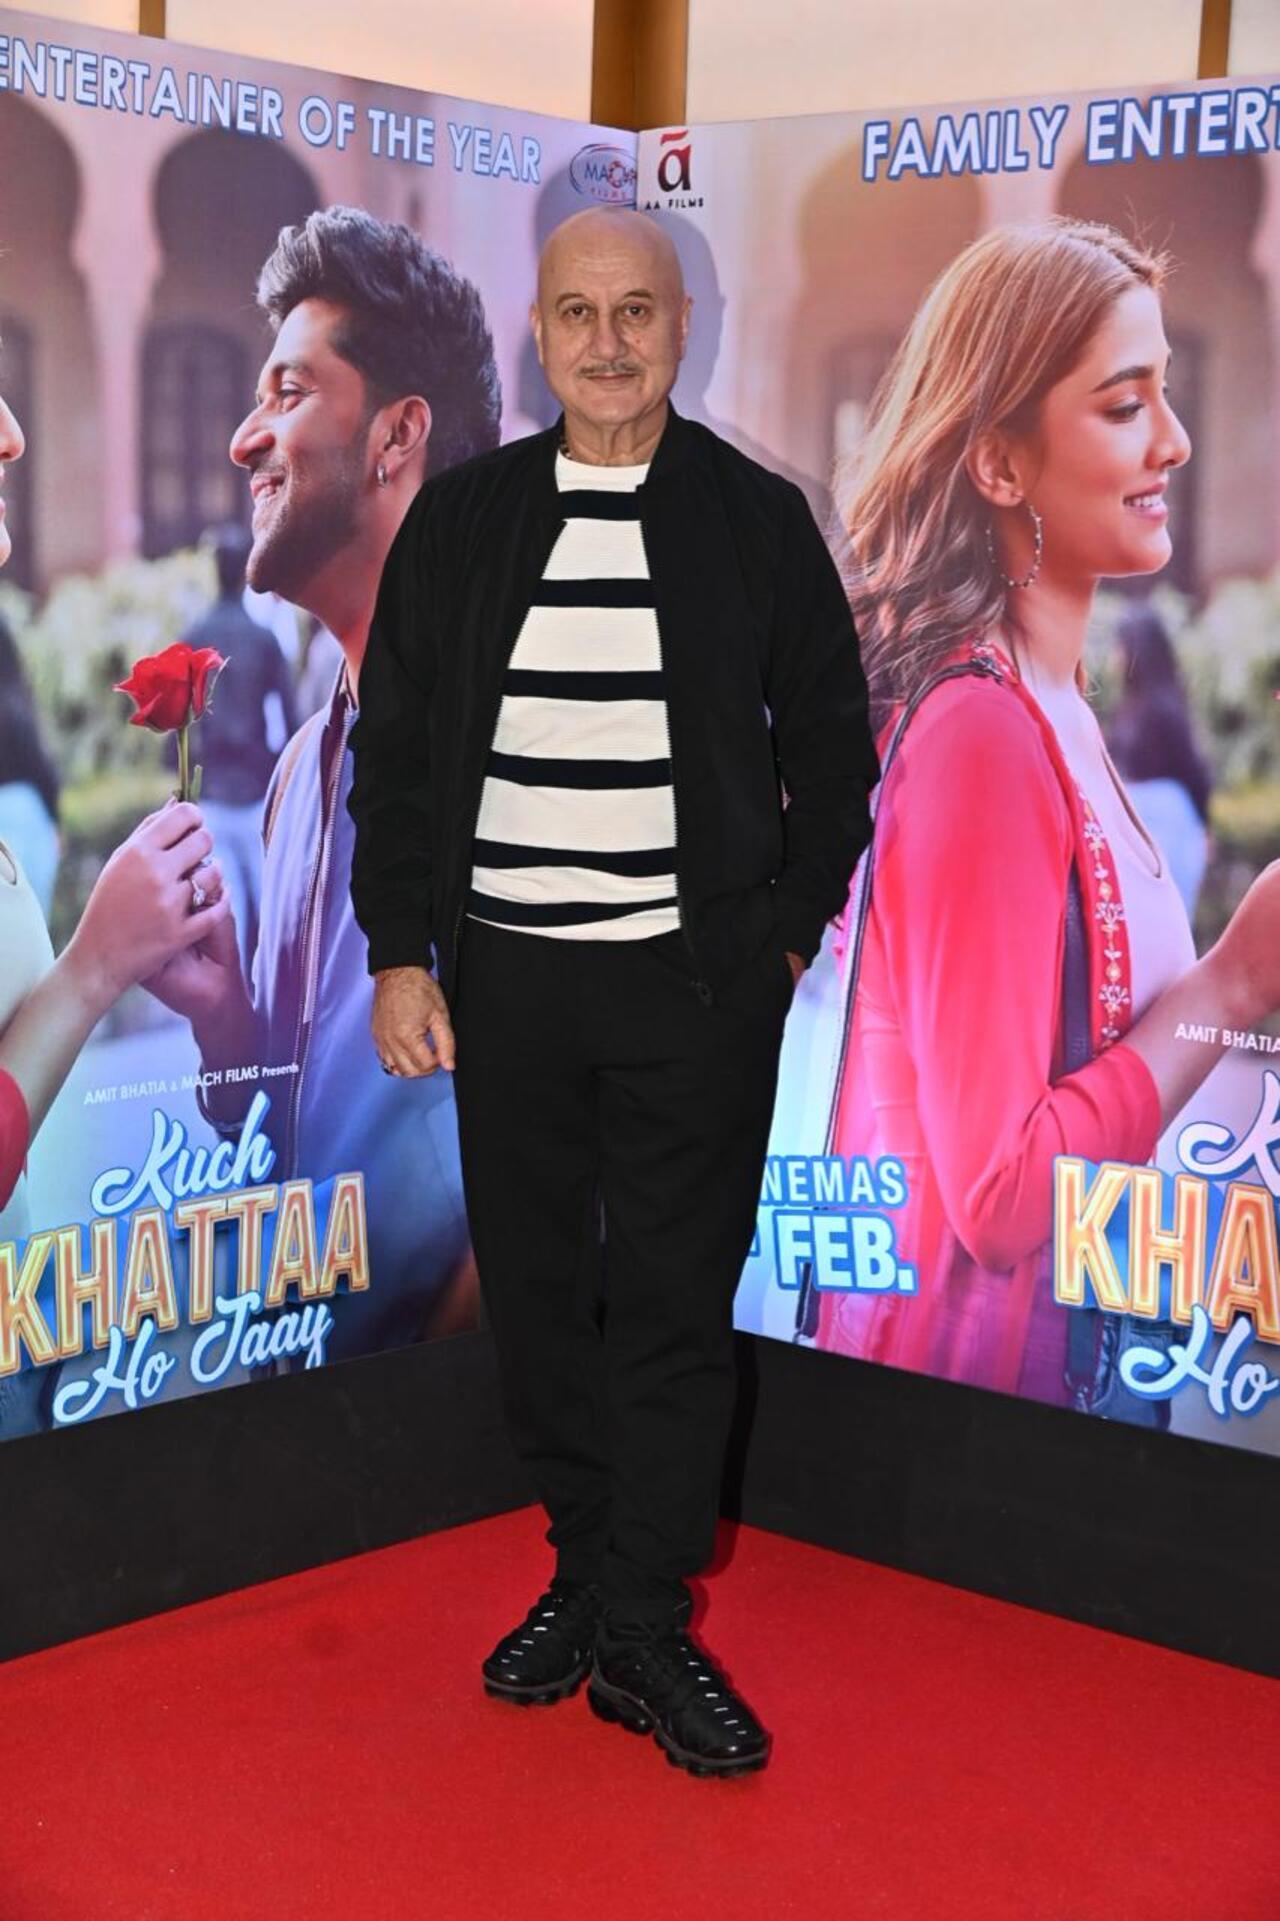 Actor Anupam Kher also showed his support towards the team of the film